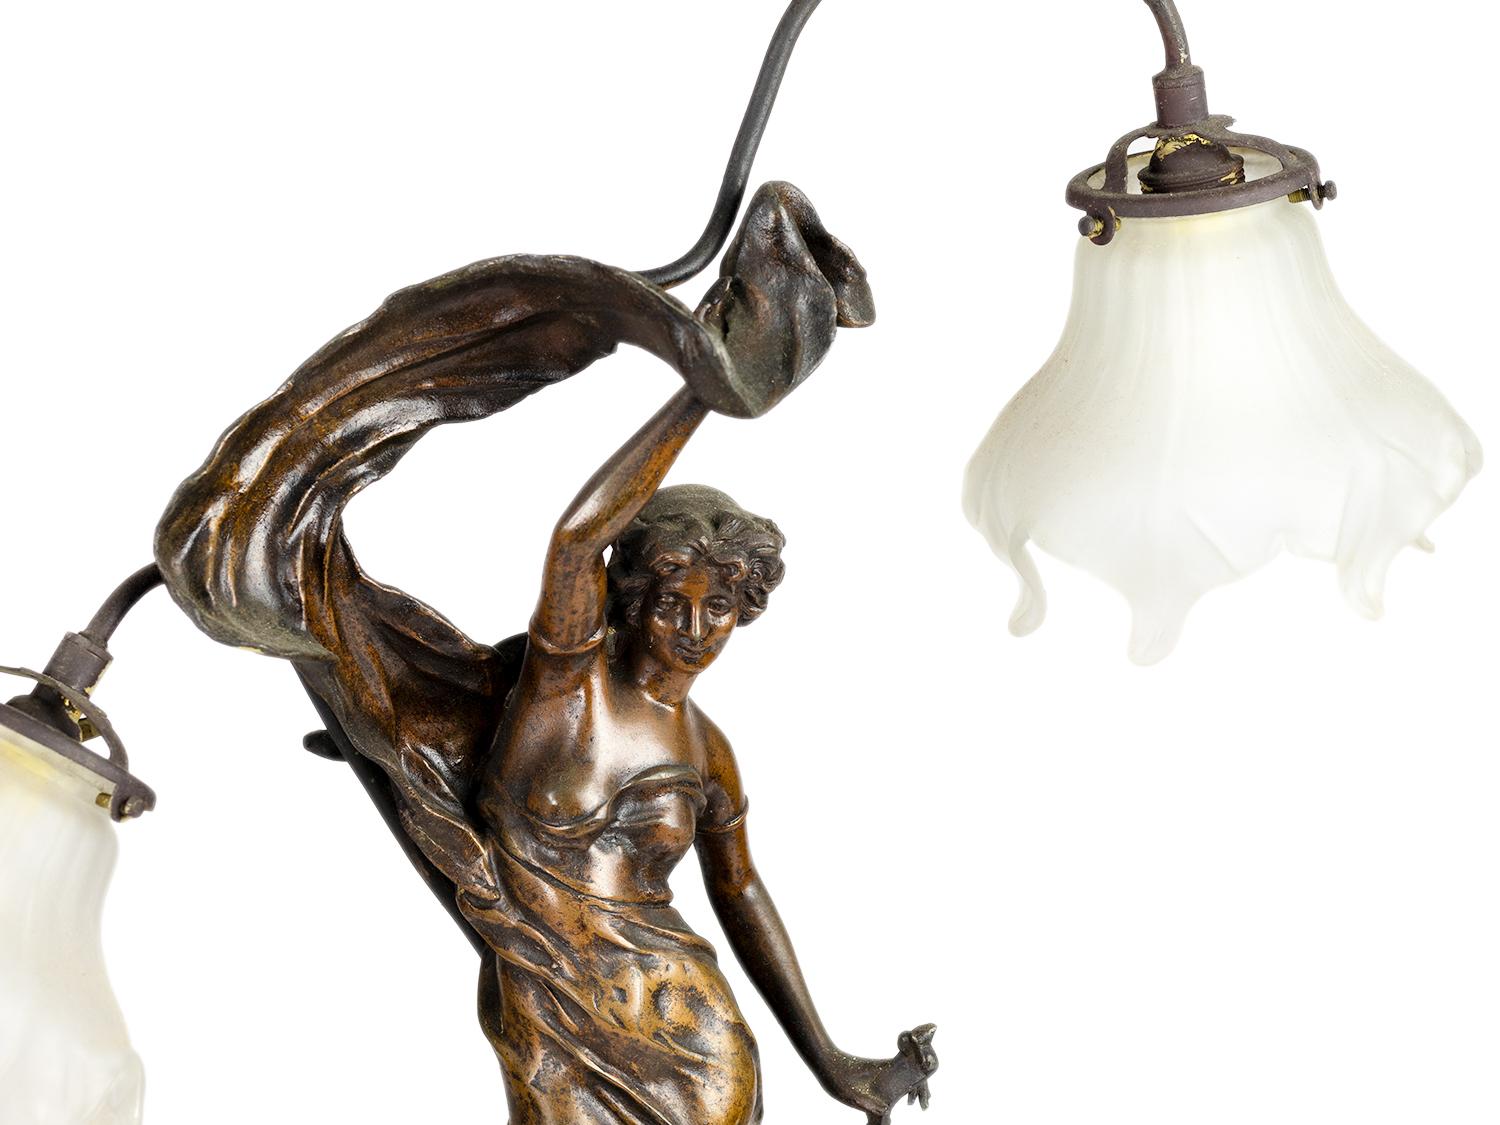 A table lamp from 1889 in spelter with two illuminated tulips and a model
of the sculpture 'Lever de l'aurore' - The Dawn in spelter, two arms and opaque pearl white tulips. 
Front plaque 'Lever de l'aurore par J. Causse'. 

Jules Caussé, son of the